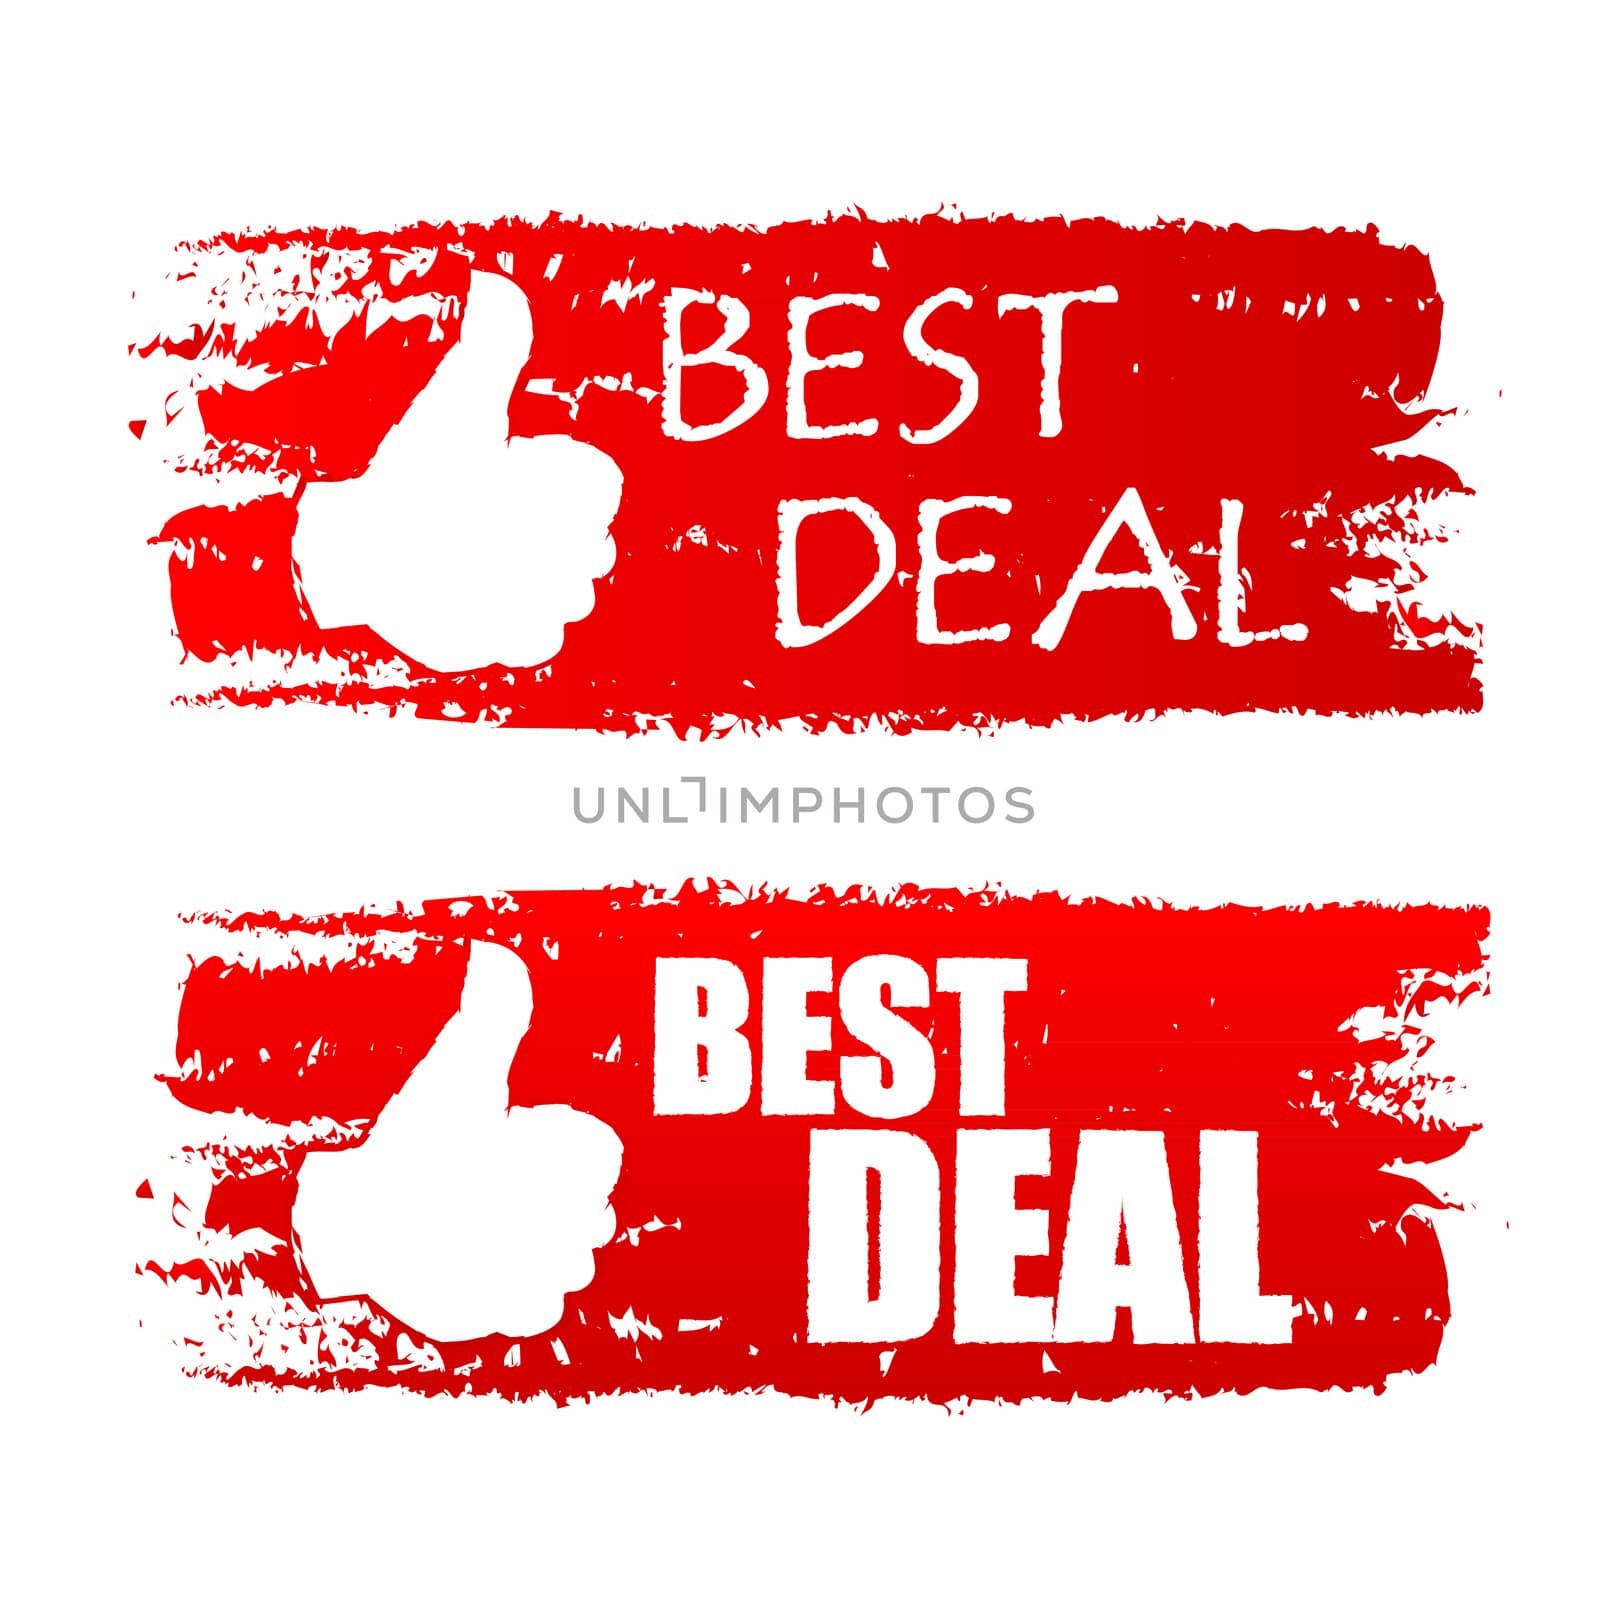 best deal banners - text in red drawn labels with white thumb up symbols, business shopping concept